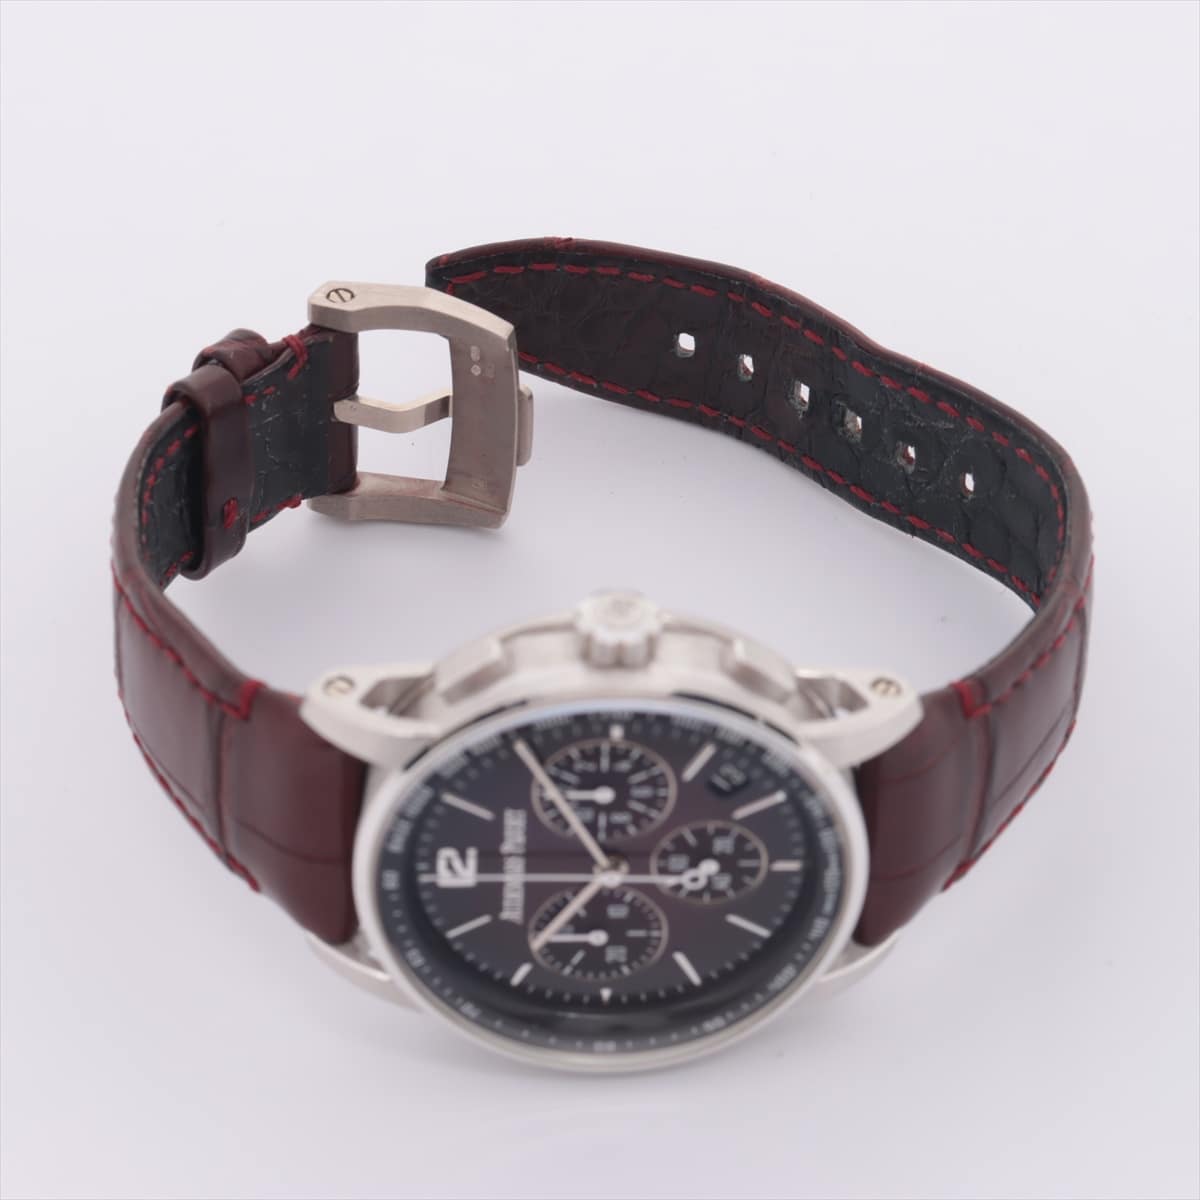 Audemars Piguet CODE11.59 26393BC.OO.A068CR.01 750 & leather AT Burgundy dial